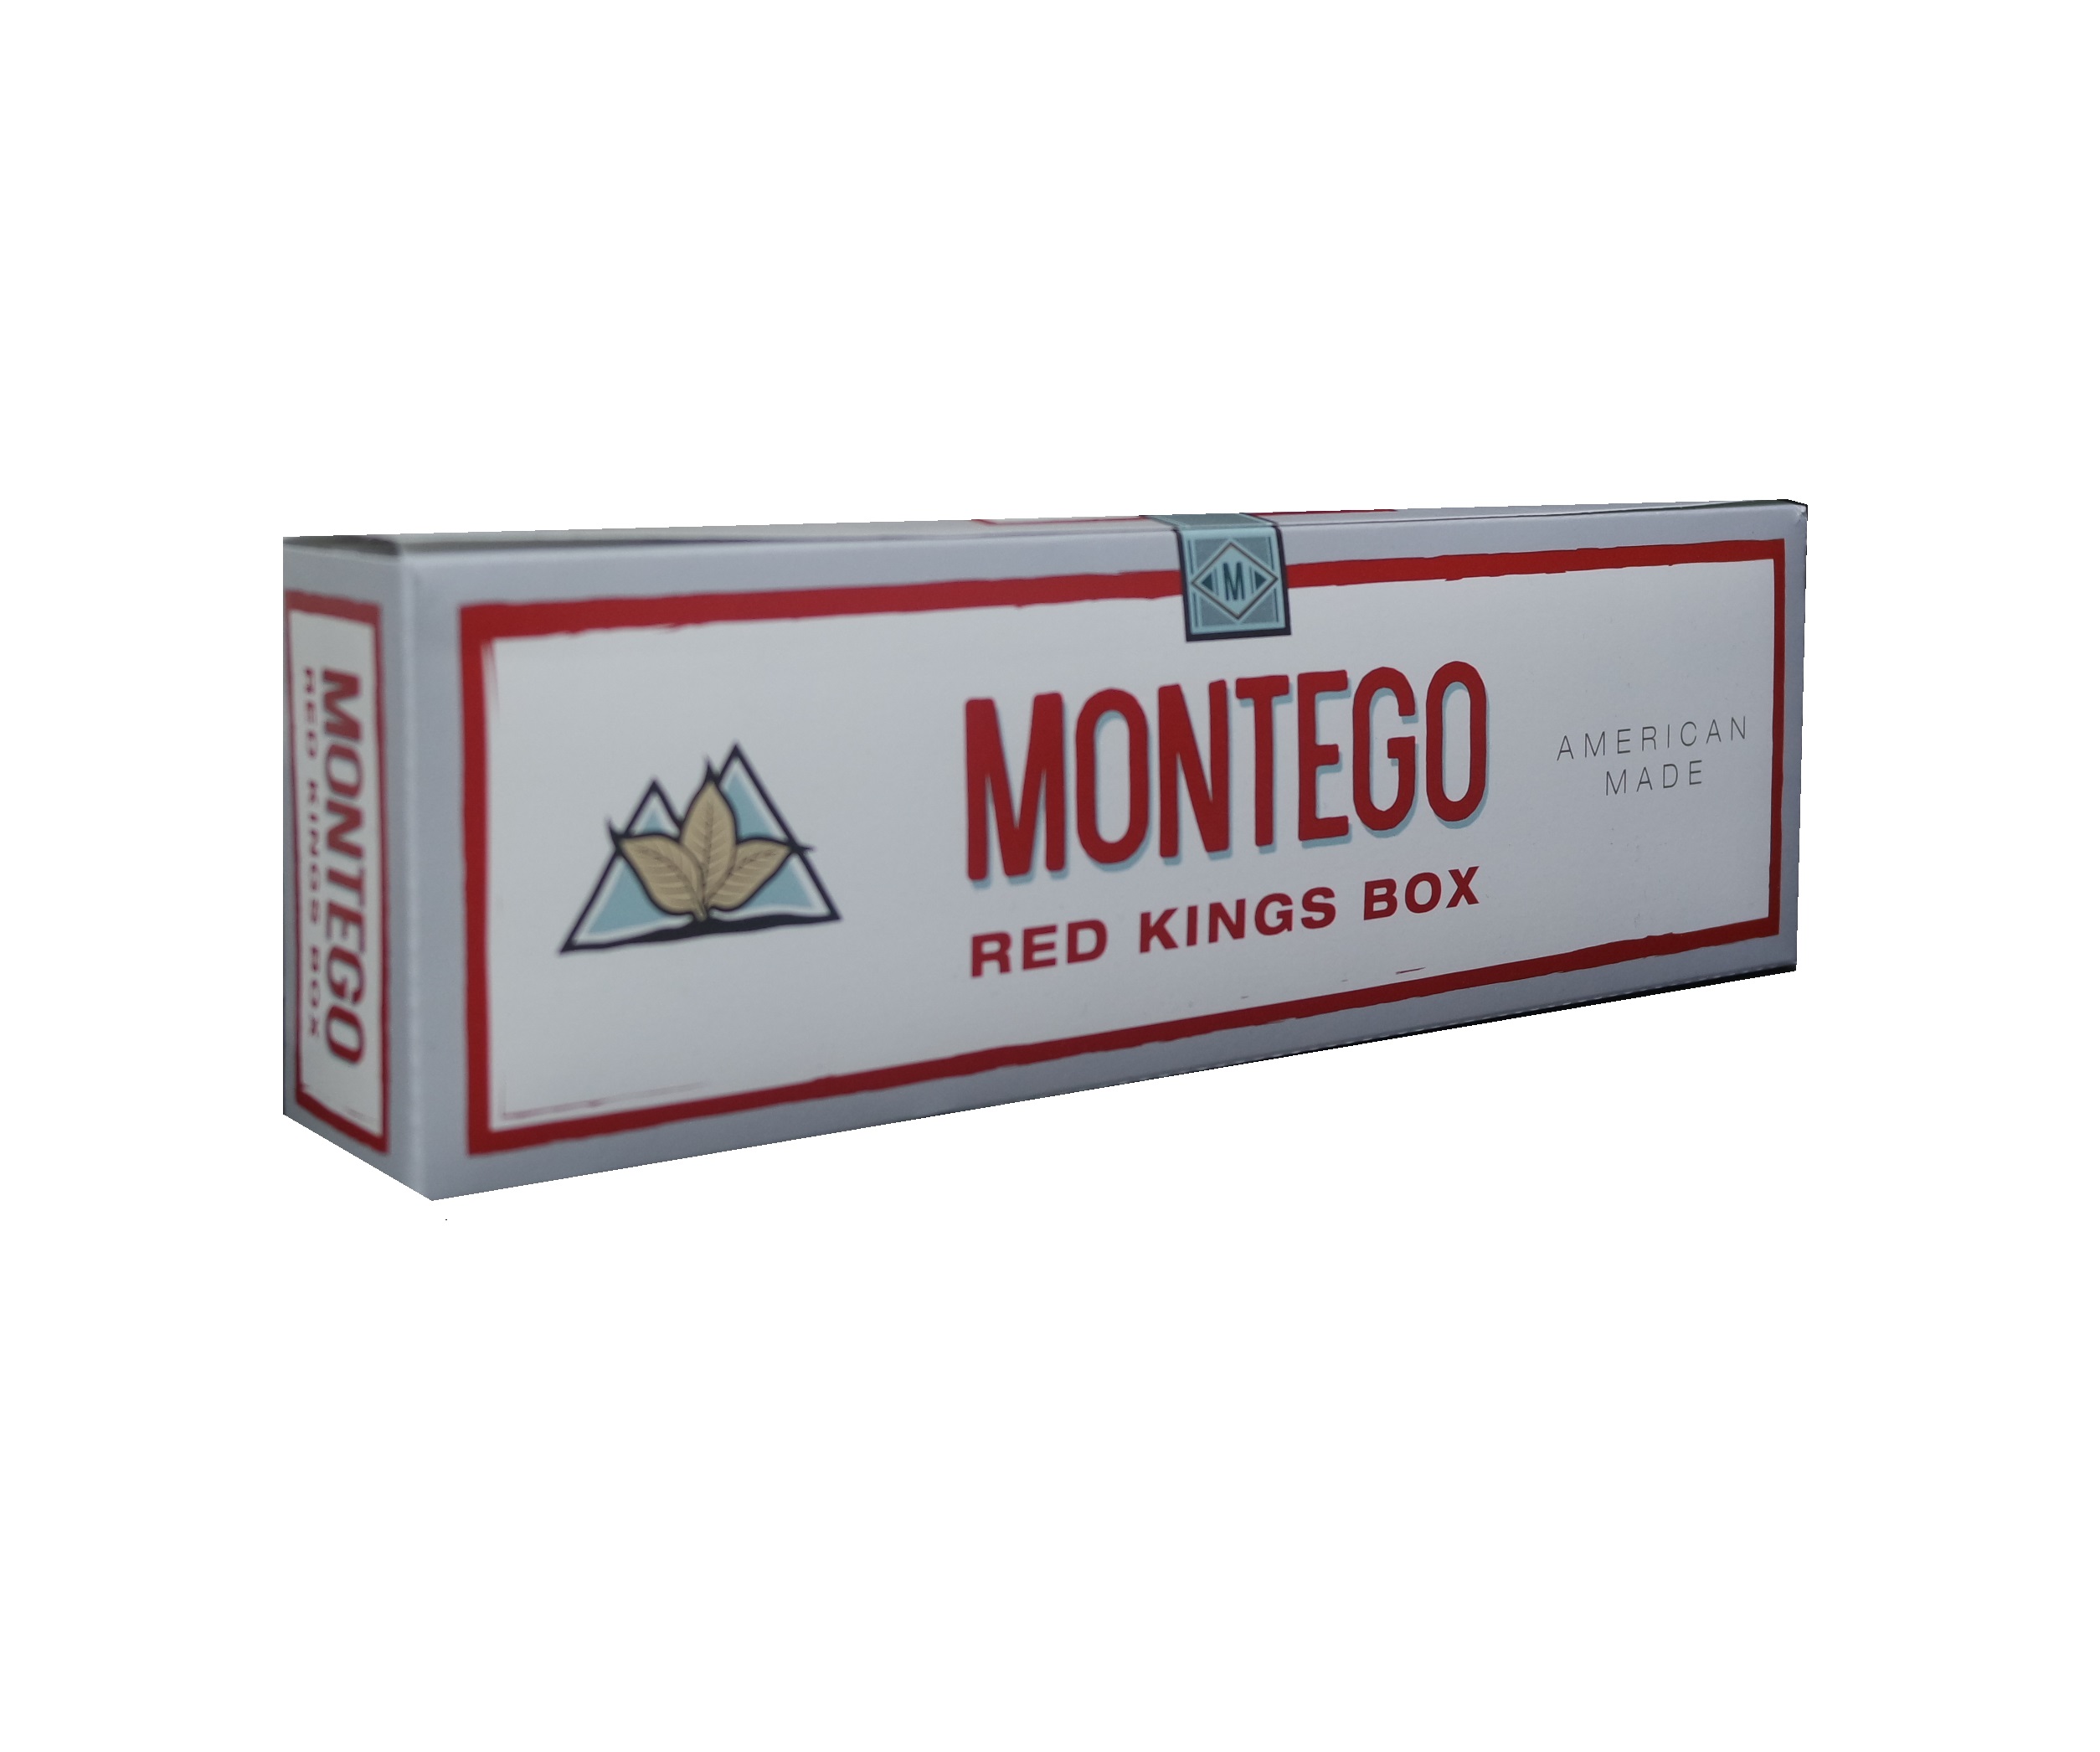 Montego red king box